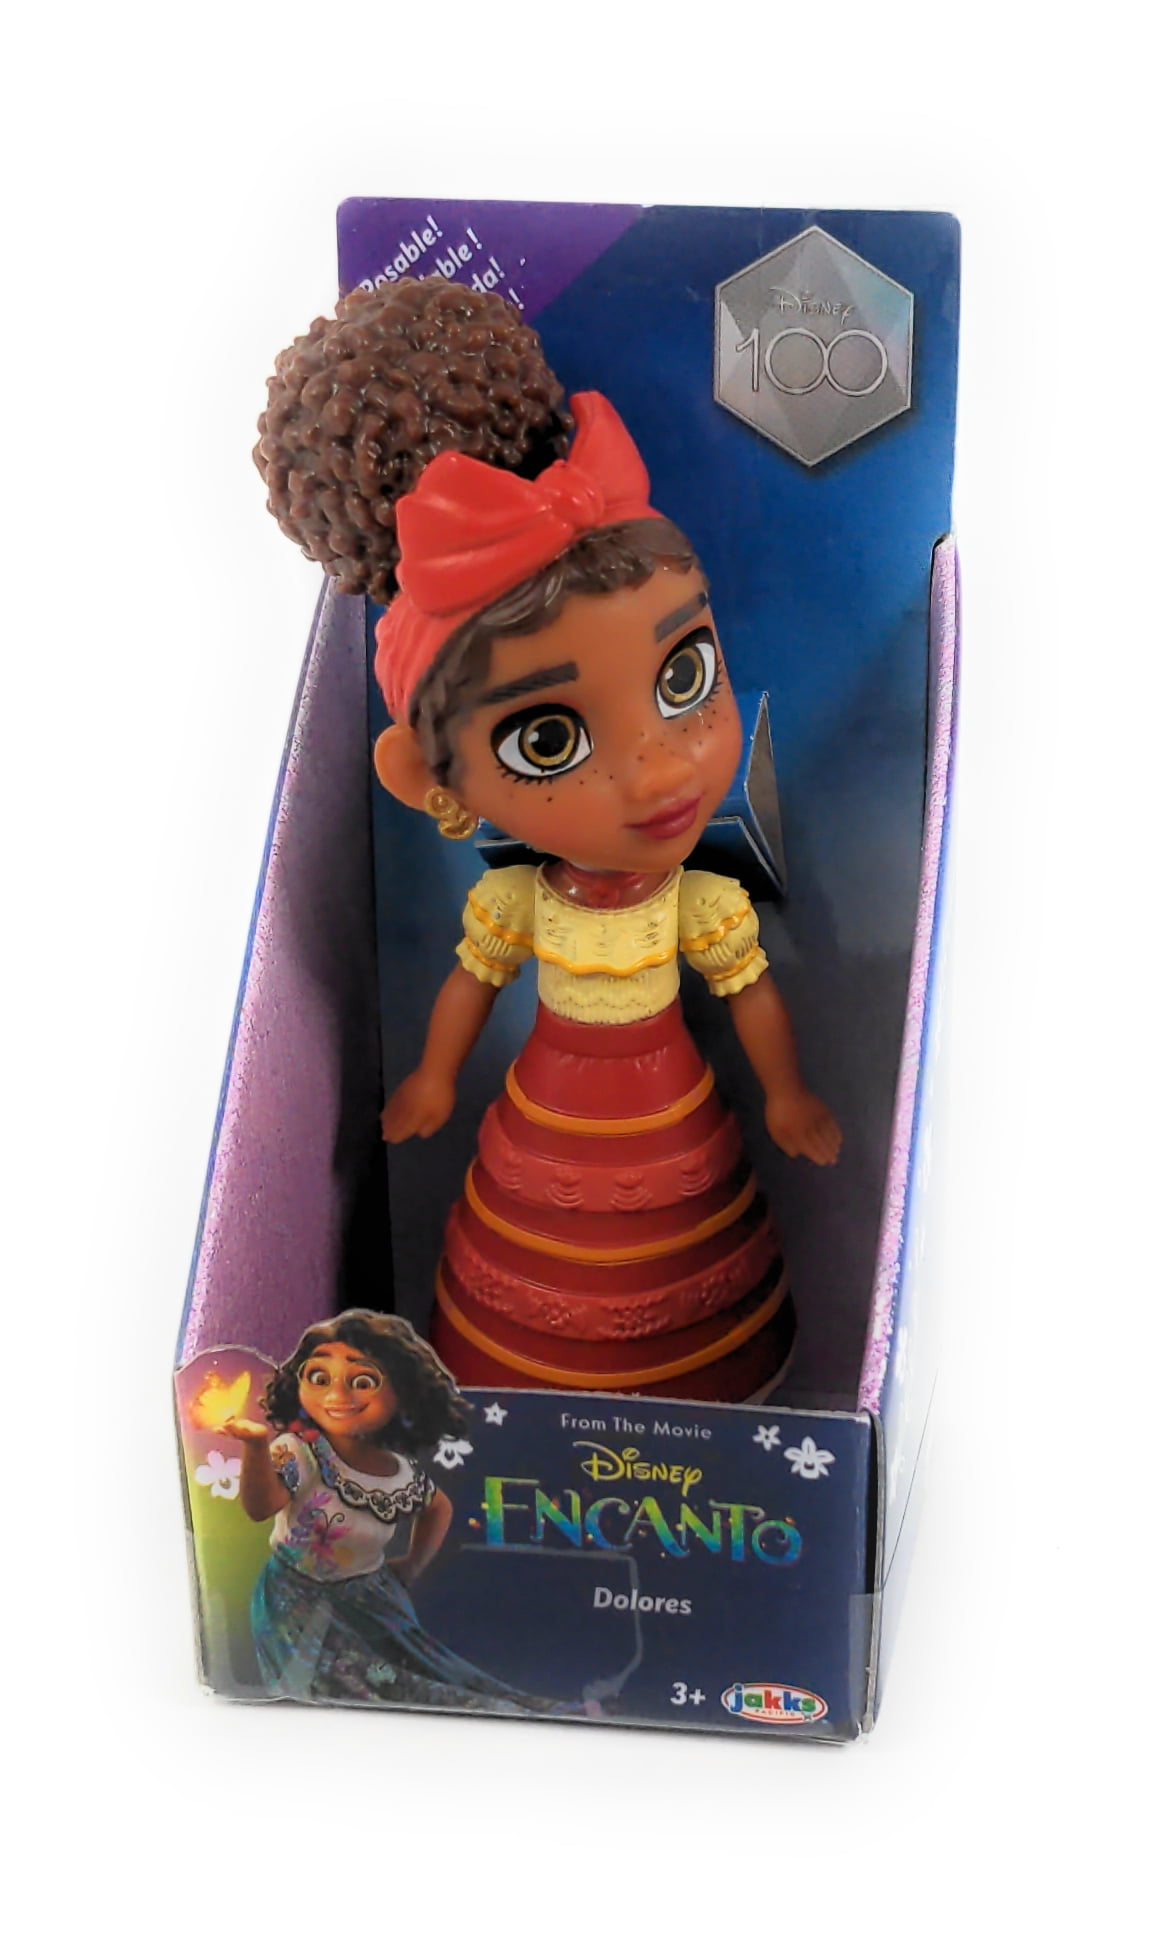 There was a cute Dolores doll at Target! But I want a Luisa doll. : r/ Encanto